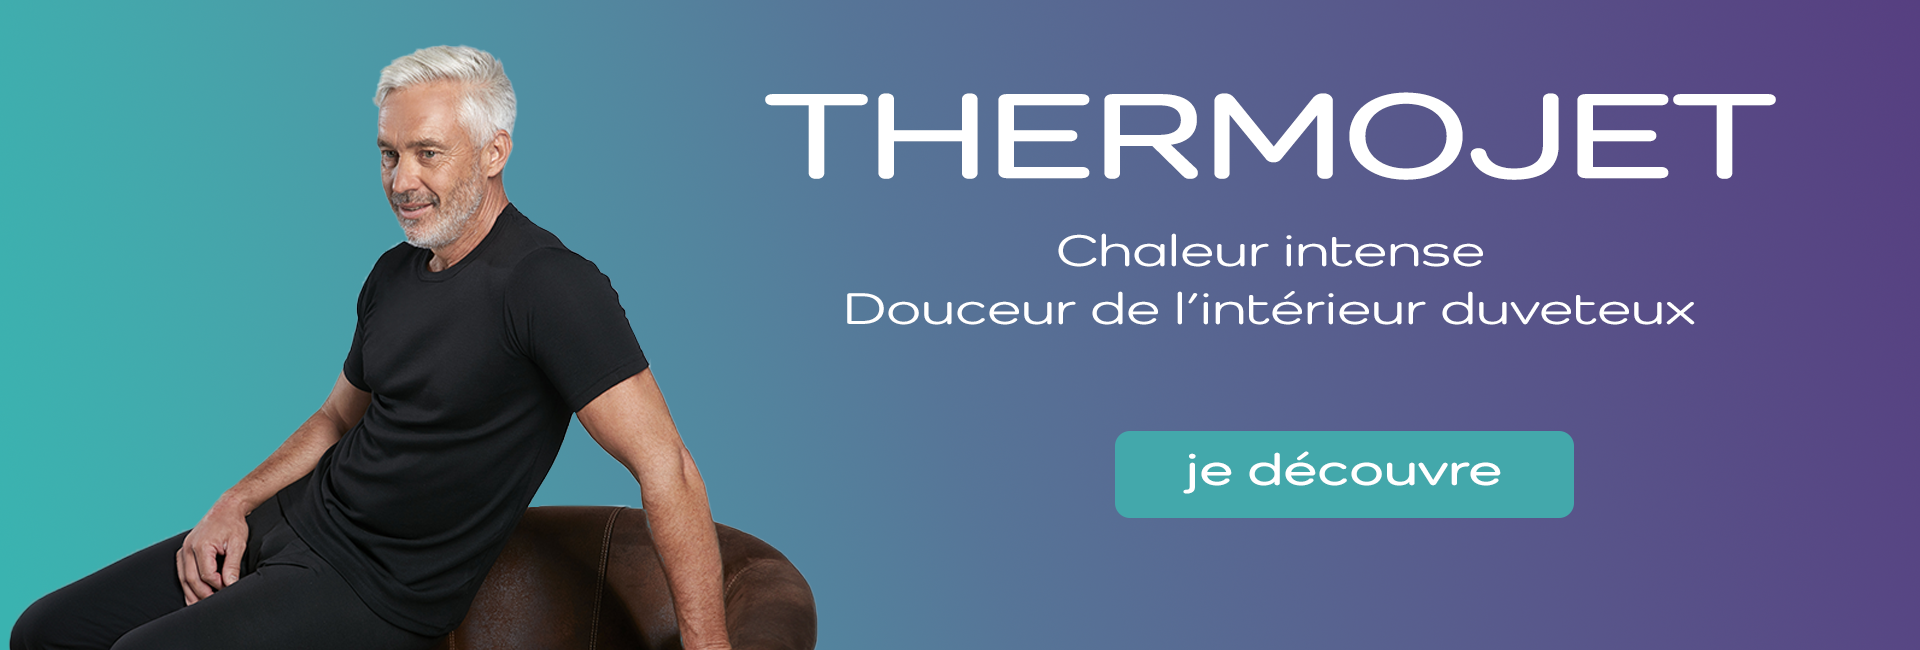 Thermojet homme